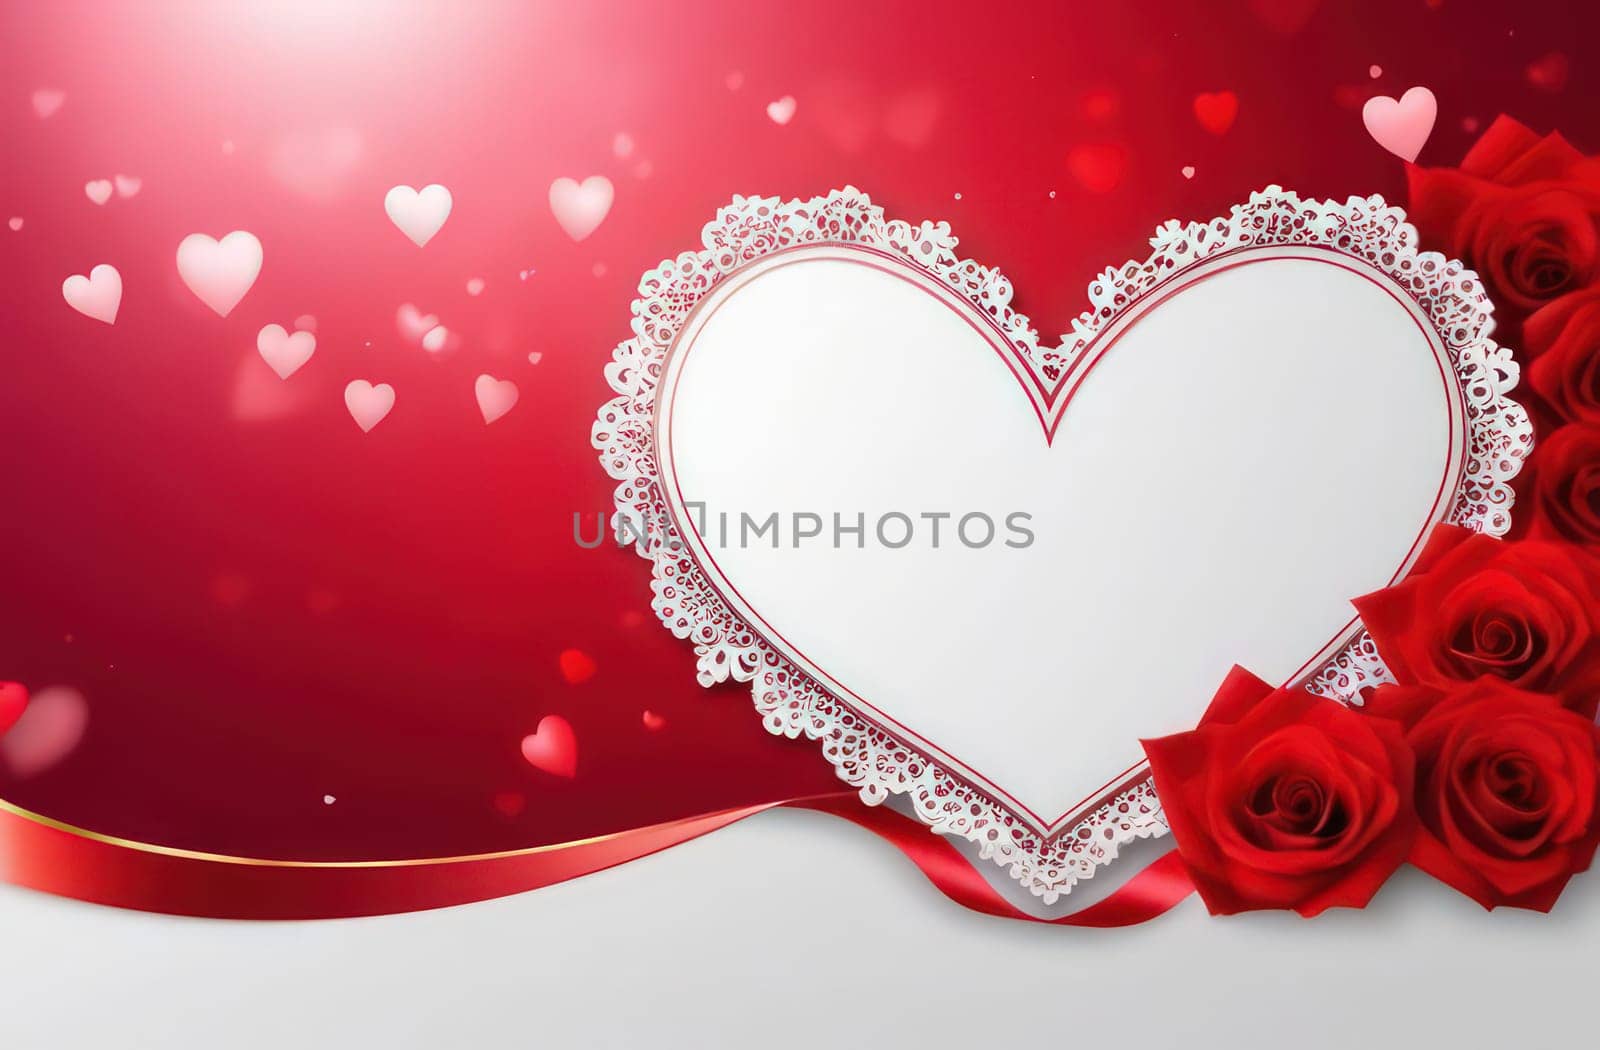 St Valentines day, wedding banner with red ornamental heart on red background. Use for love sale banner, voucher, greeting card. Copy space. Beautiful love background for valentines day greeting card. by Angelsmoon